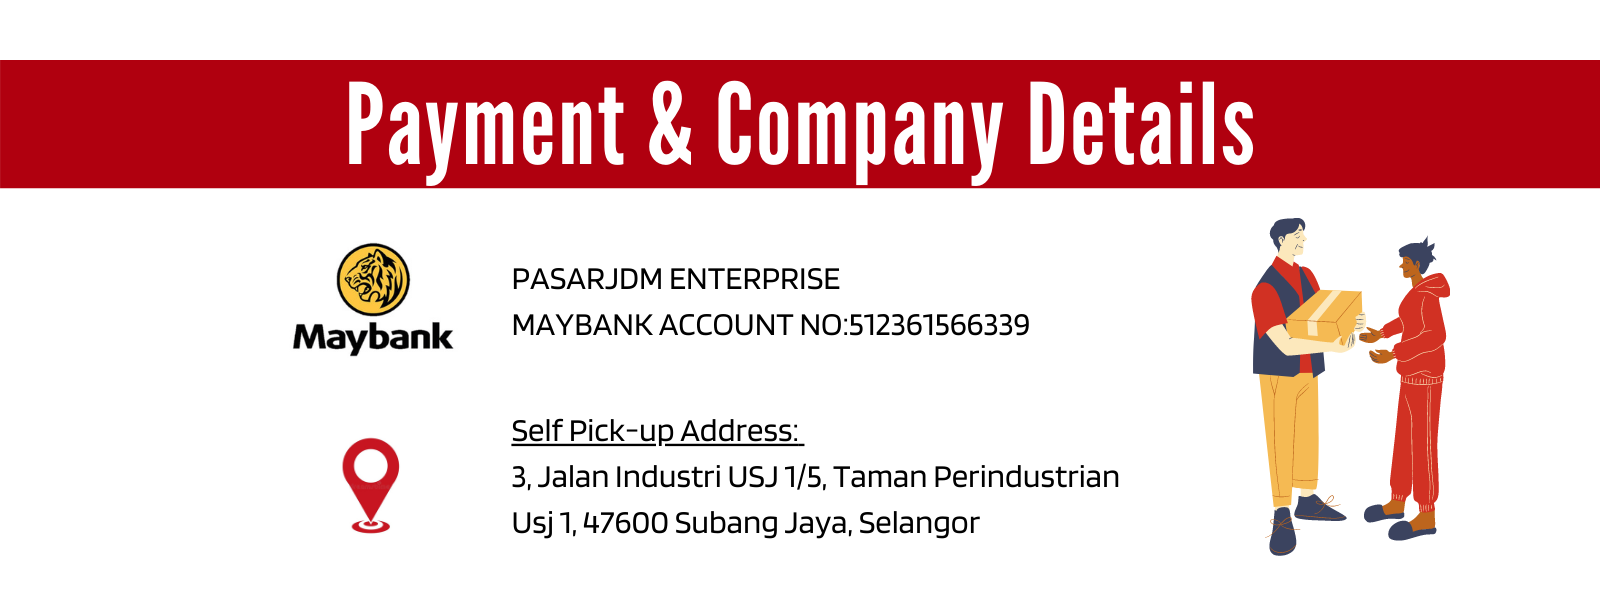 Payment and Company Details